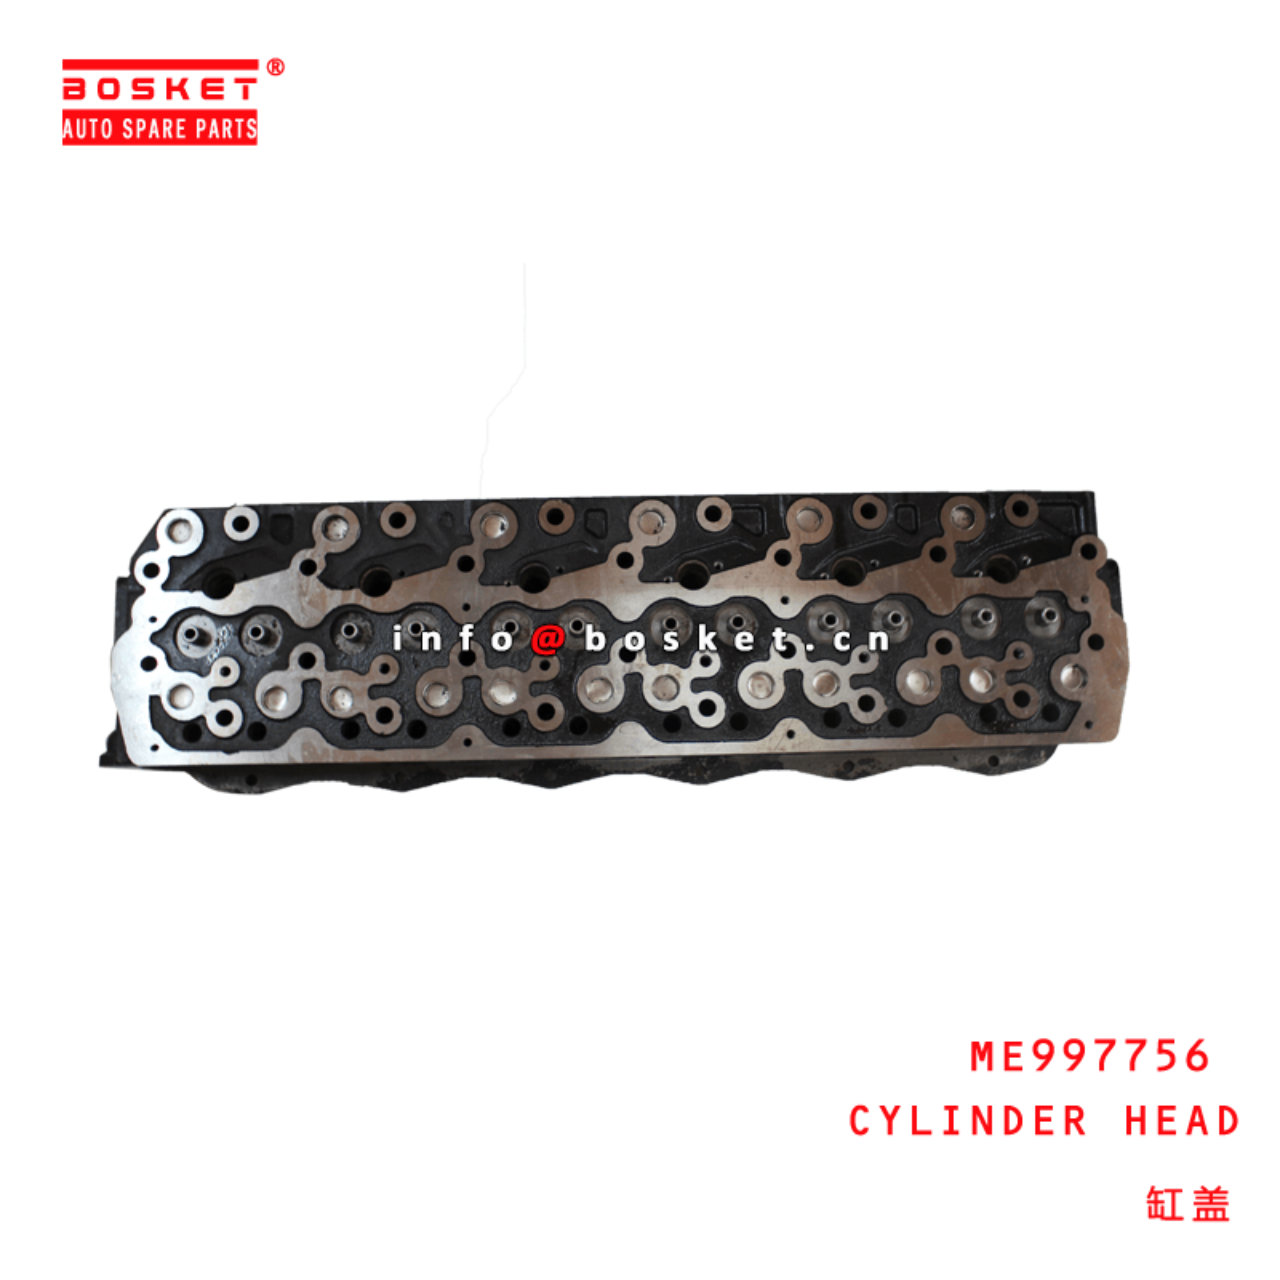 ME997756 Cylinder Head Suitable For MITSUBISHI FUSO 6D16 